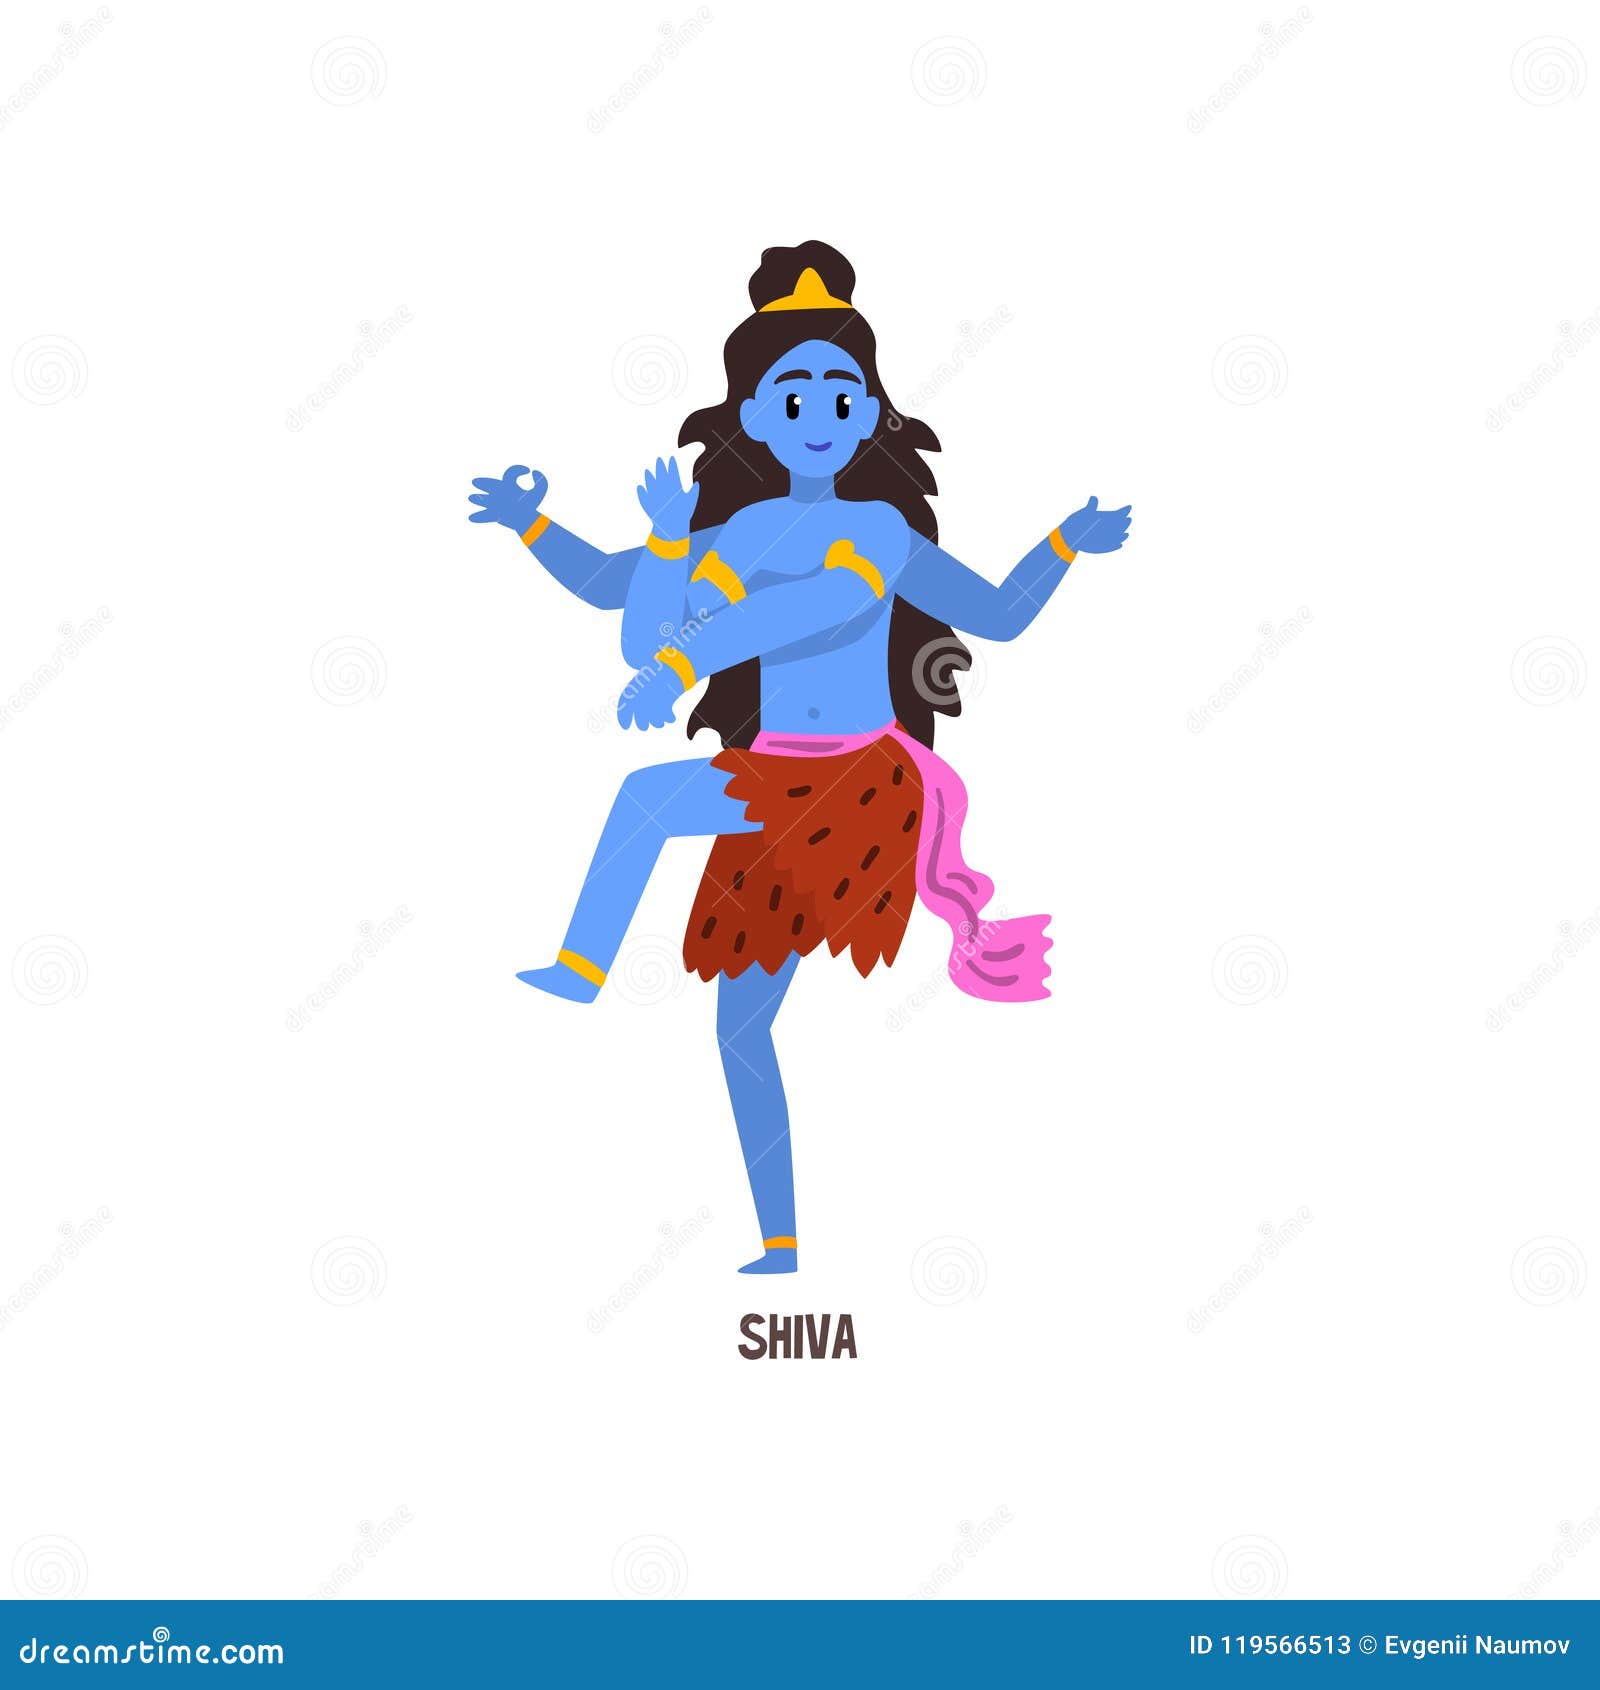 Shiva Indian God Cartoon Character Vector Illustration on a White  Background Stock Vector - Illustration of religion, culture: 119566513